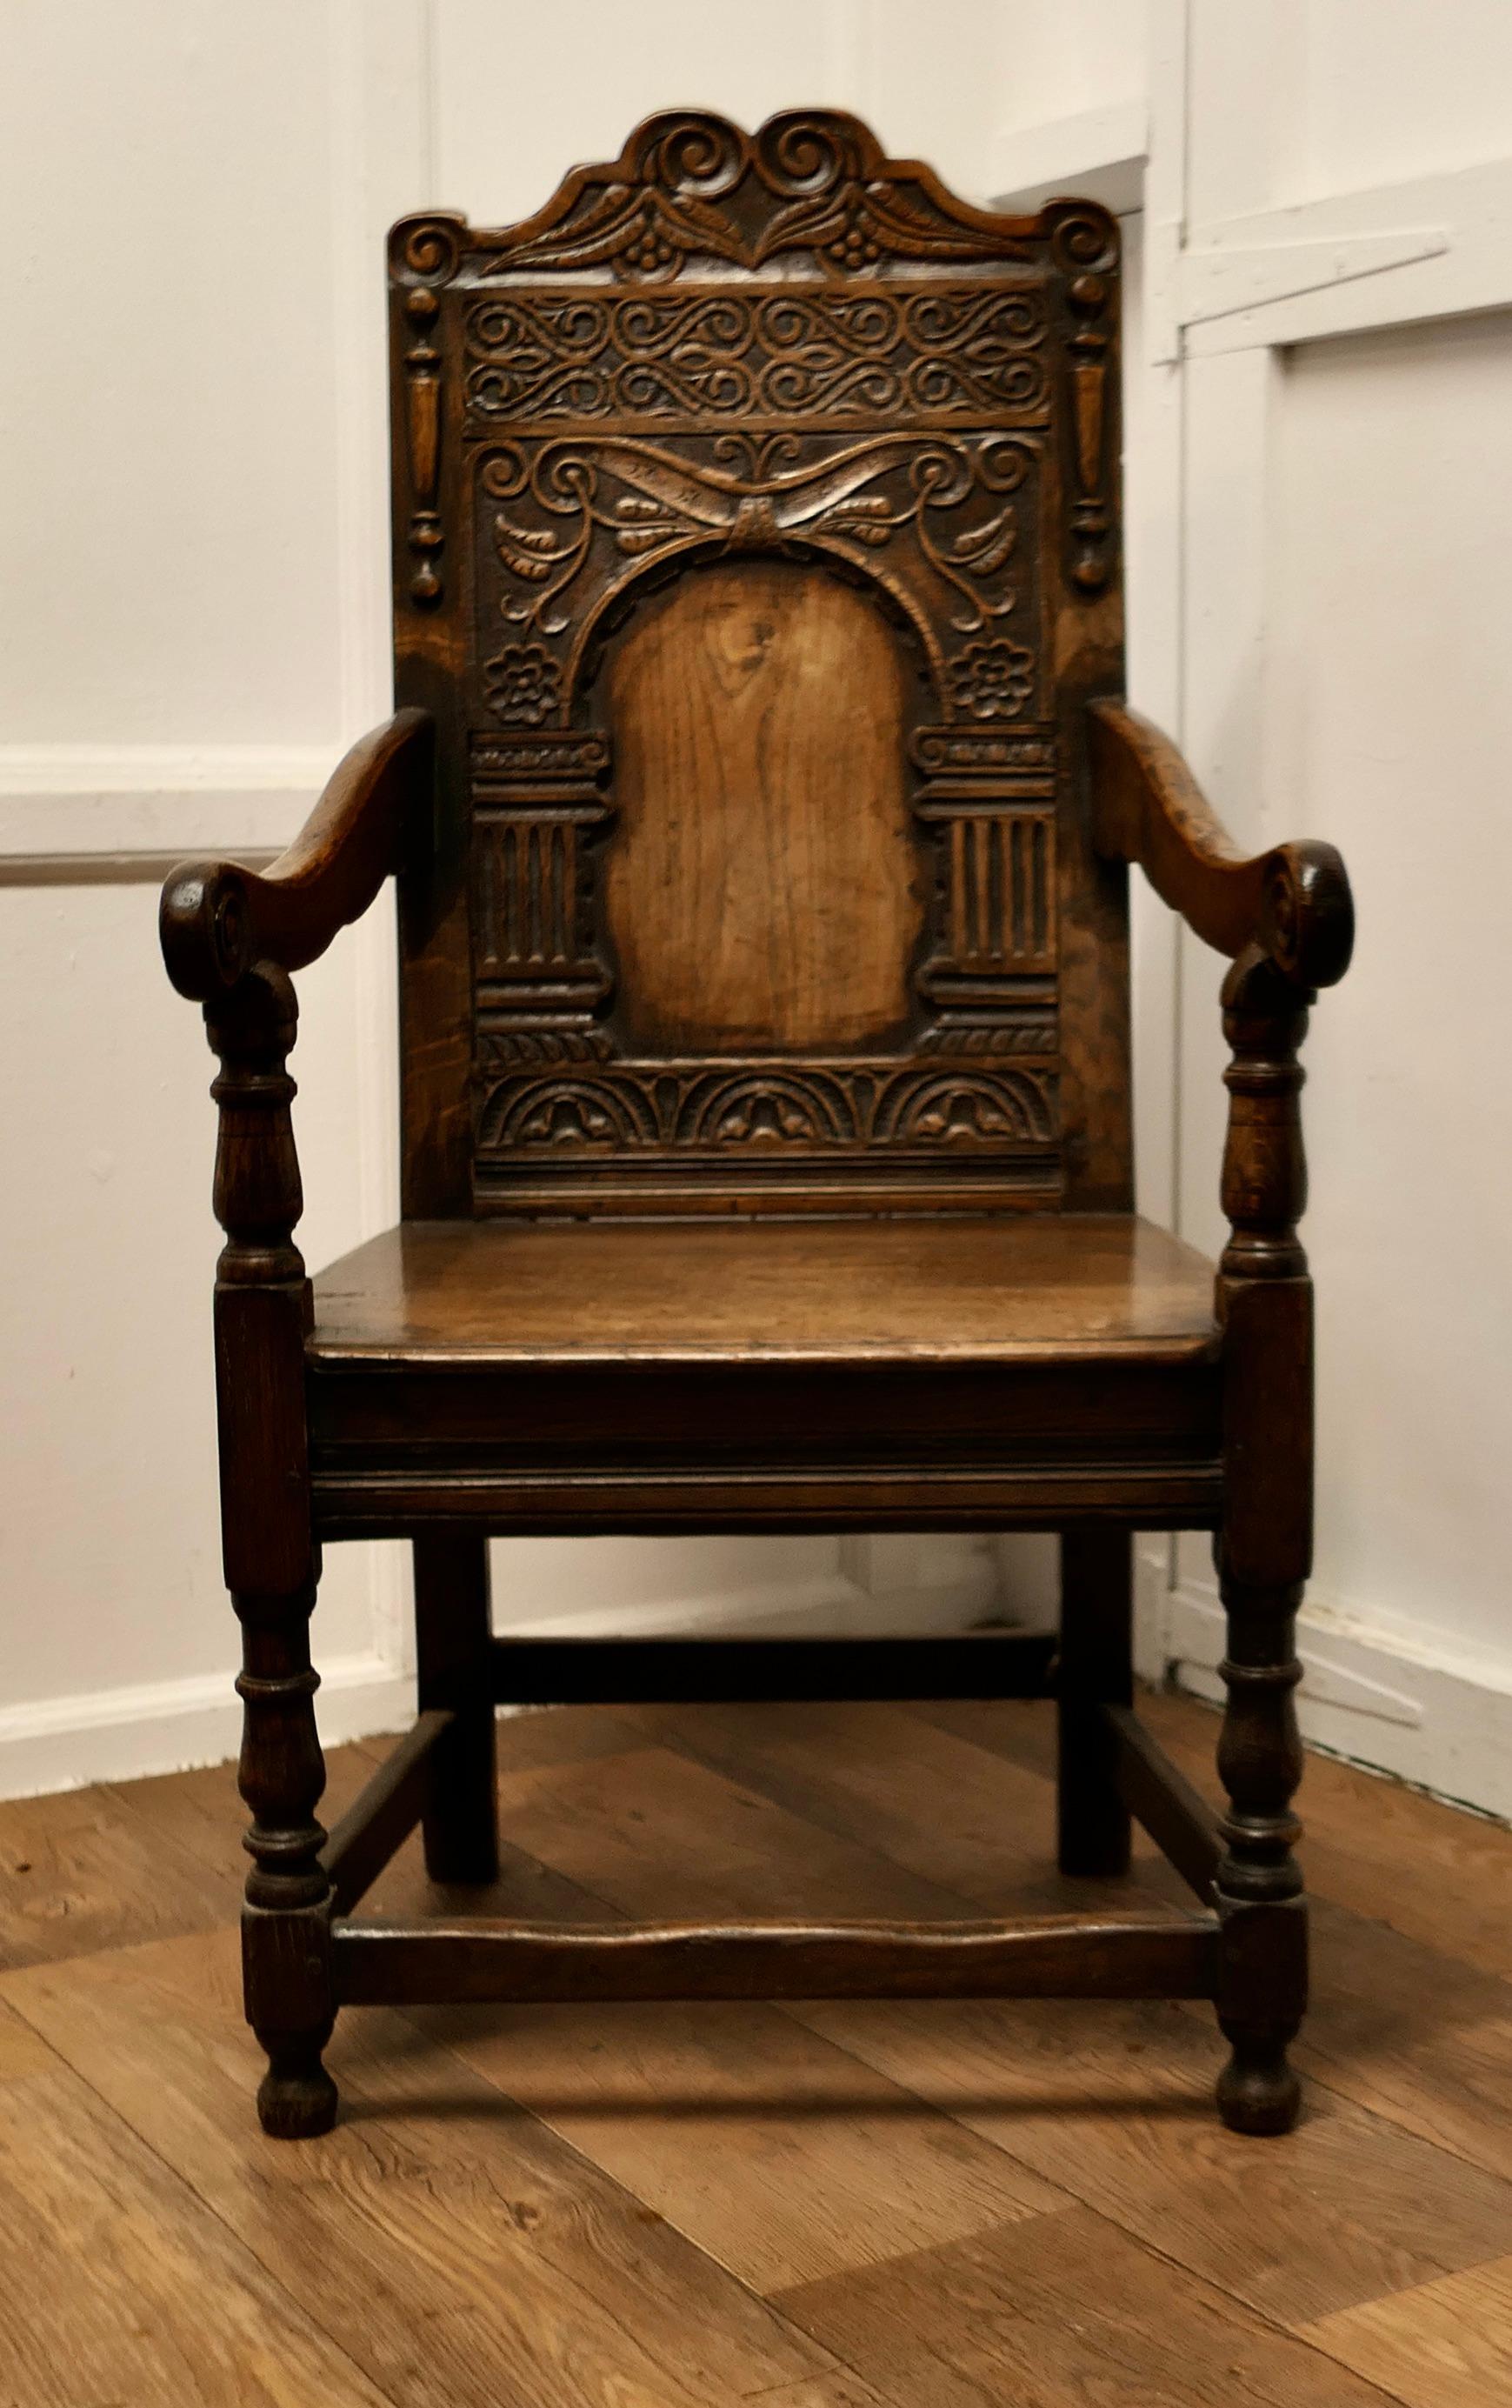 18th Century Carved Oak Celtic Wainscot Chair

This Handsome Chair, has a magnificent patina, it has a solid plank seat, turned legs and carved arm rests. The decorative high throne back is deeply carved with the traditional Celtic design